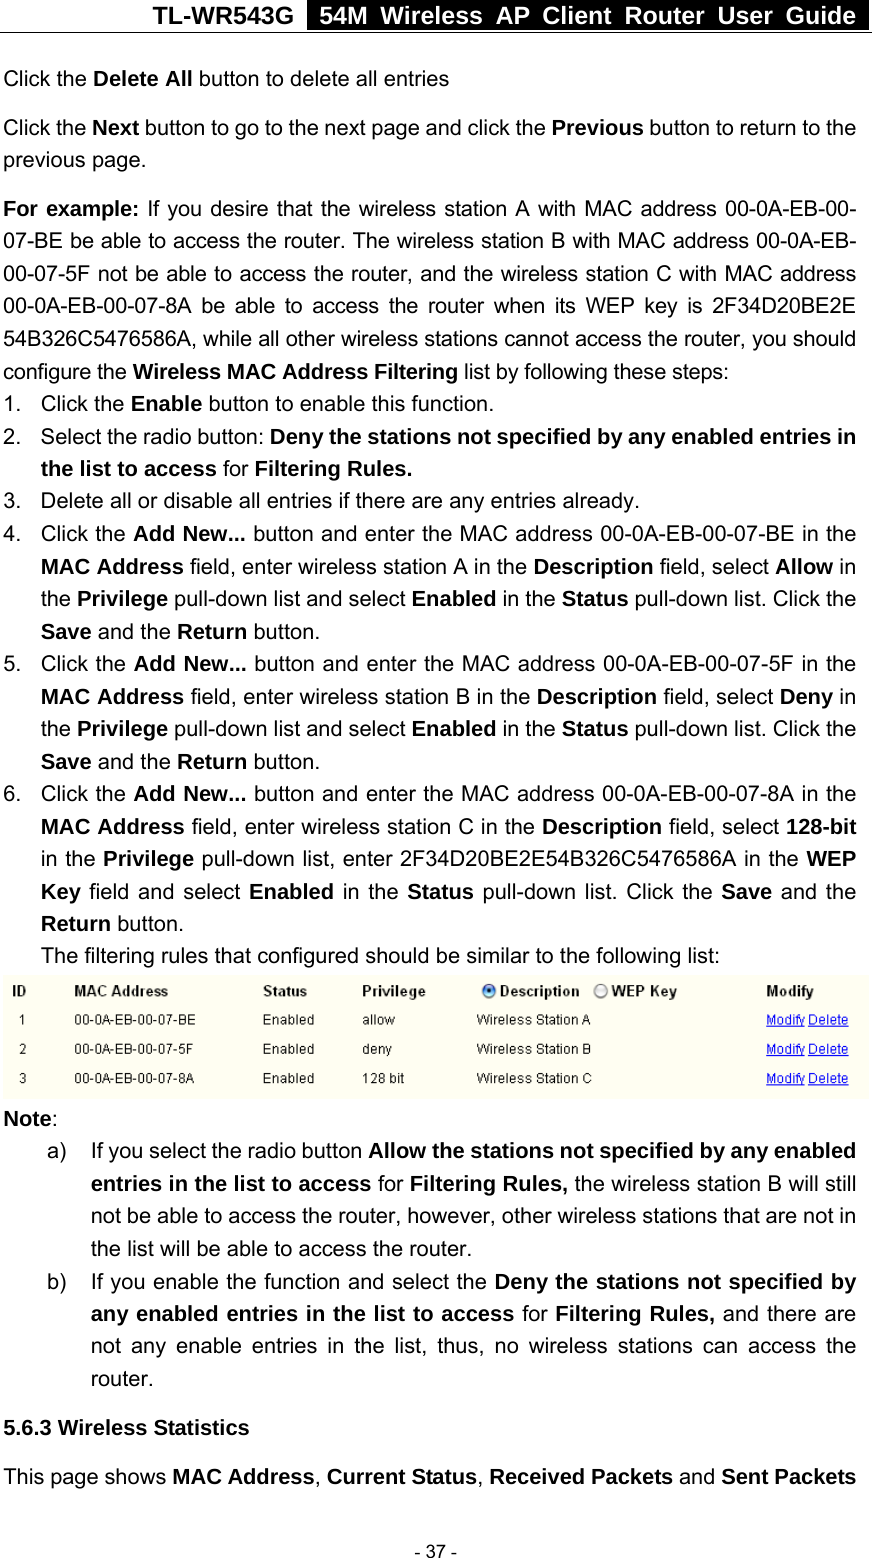 TL-WR543G   54M Wireless AP Client Router User Guide  Click the Delete All button to delete all entries Click the Next button to go to the next page and click the Previous button to return to the previous page. For example: If you desire that the wireless station A with MAC address 00-0A-EB-00- 07-BE be able to access the router. The wireless station B with MAC address 00-0A-EB- 00-07-5F not be able to access the router, and the wireless station C with MAC address 00-0A-EB-00-07-8A be able to access the router when its WEP key is 2F34D20BE2E 54B326C5476586A, while all other wireless stations cannot access the router, you should configure the Wireless MAC Address Filtering list by following these steps: 1. Click the Enable button to enable this function. 2.  Select the radio button: Deny the stations not specified by any enabled entries in the list to access for Filtering Rules. 3.  Delete all or disable all entries if there are any entries already. 4. Click the Add New... button and enter the MAC address 00-0A-EB-00-07-BE in the MAC Address field, enter wireless station A in the Description field, select Allow in the Privilege pull-down list and select Enabled in the Status pull-down list. Click the Save and the Return button. 5. Click the Add New... button and enter the MAC address 00-0A-EB-00-07-5F in the MAC Address field, enter wireless station B in the Description field, select Deny in the Privilege pull-down list and select Enabled in the Status pull-down list. Click the Save and the Return button. 6. Click the Add New... button and enter the MAC address 00-0A-EB-00-07-8A in the MAC Address field, enter wireless station C in the Description field, select 128-bit in the Privilege pull-down list, enter 2F34D20BE2E54B326C5476586A in the WEP Key field and select Enabled in the Status pull-down list. Click the Save and the Return button. The filtering rules that configured should be similar to the following list:  Note:  a)  If you select the radio button Allow the stations not specified by any enabled entries in the list to access for Filtering Rules, the wireless station B will still not be able to access the router, however, other wireless stations that are not in the list will be able to access the router. b)  If you enable the function and select the Deny the stations not specified by any enabled entries in the list to access for Filtering Rules, and there are not any enable entries in the list, thus, no wireless stations can access the router. 5.6.3 Wireless Statistics This page shows MAC Address, Current Status, Received Packets and Sent Packets  - 37 - 